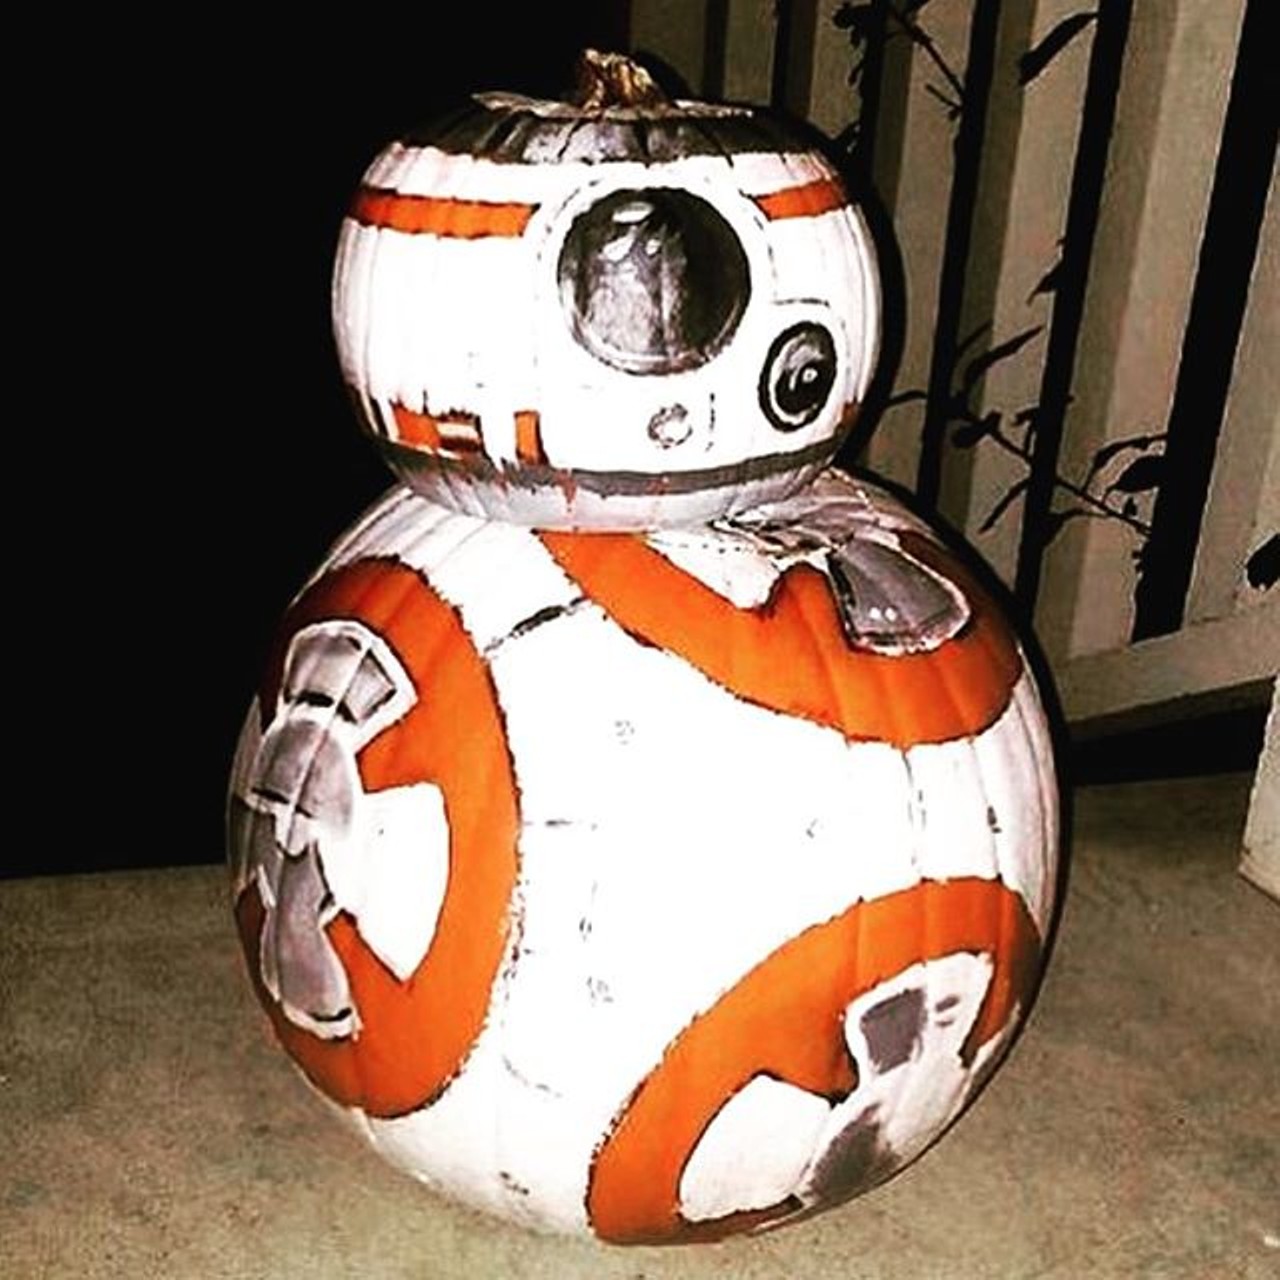 BB-8 Droid from Star Wars: The Force Awakens 
Photo via feom